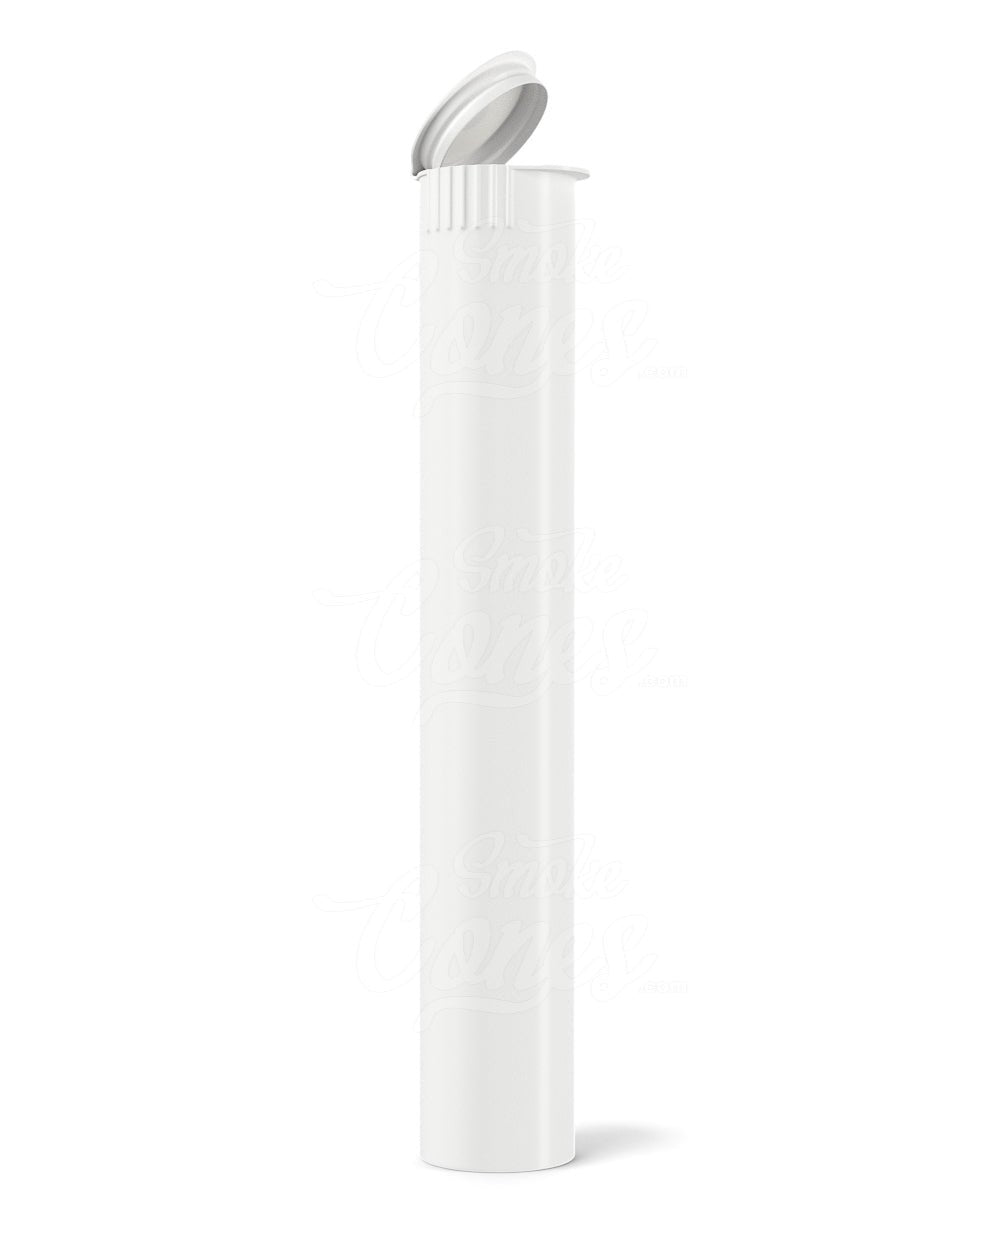 116mm Child Resistant King Size Biodegradable Pop Top White Plastic Pre-Roll Tubes 1000/Box - 1